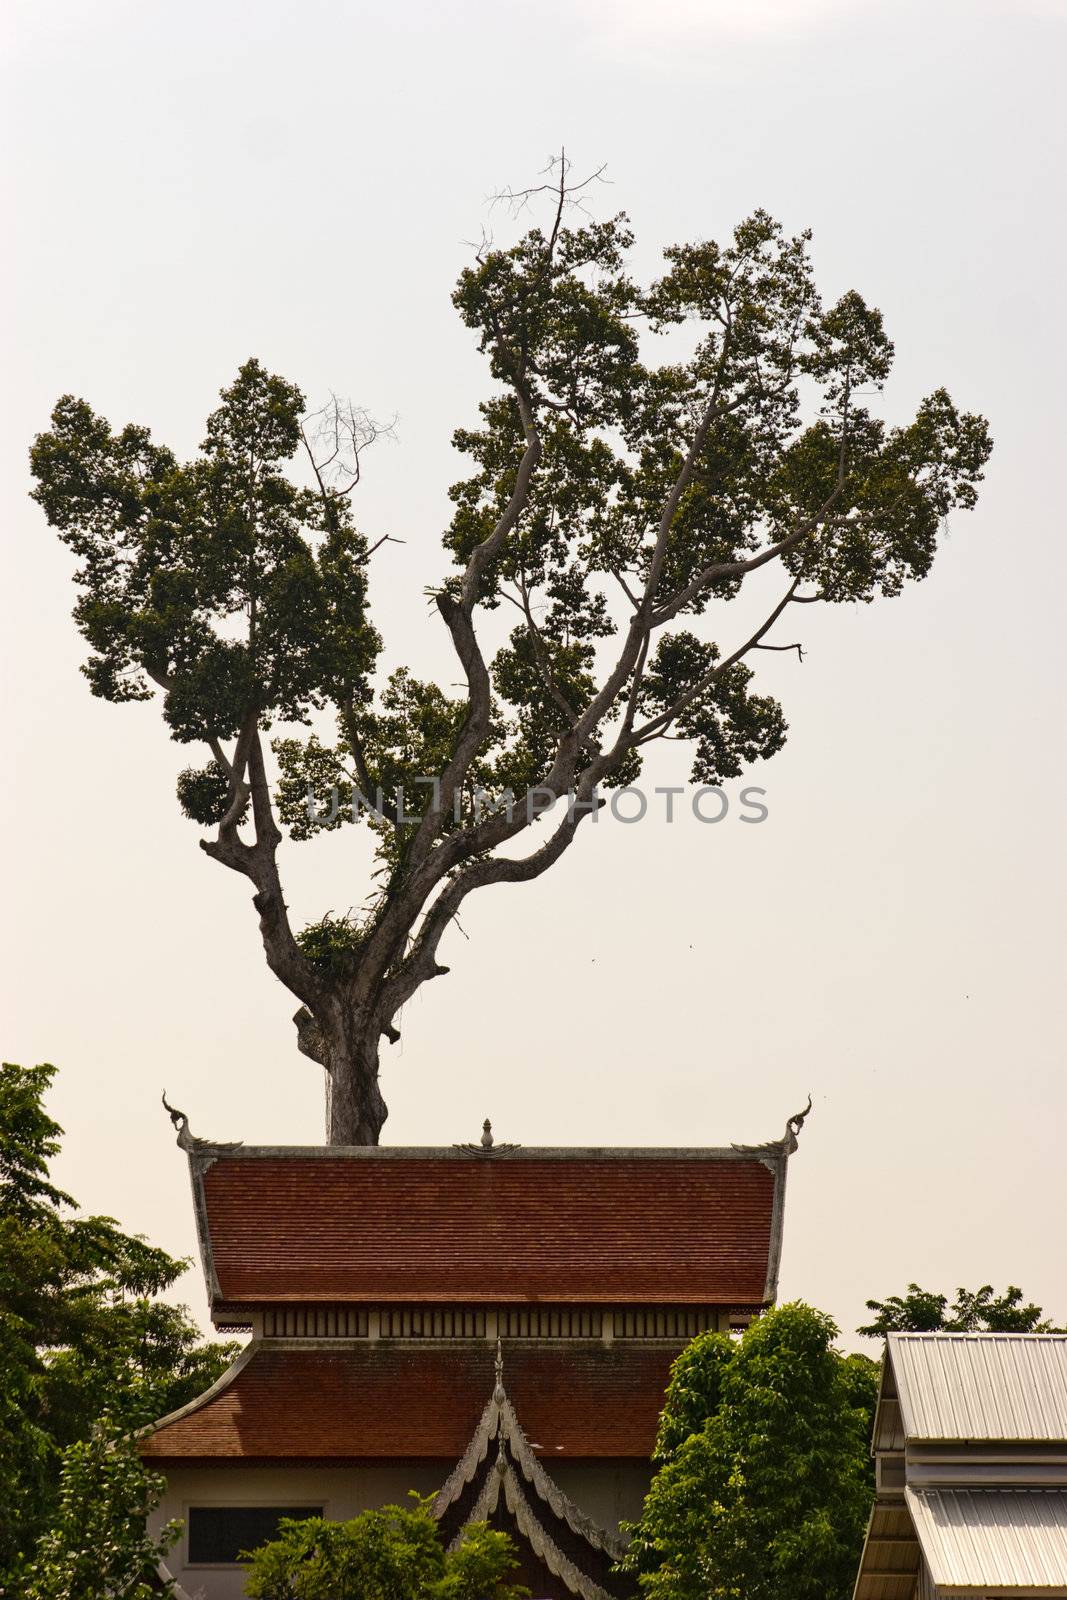 Tree above a Thai temple roof